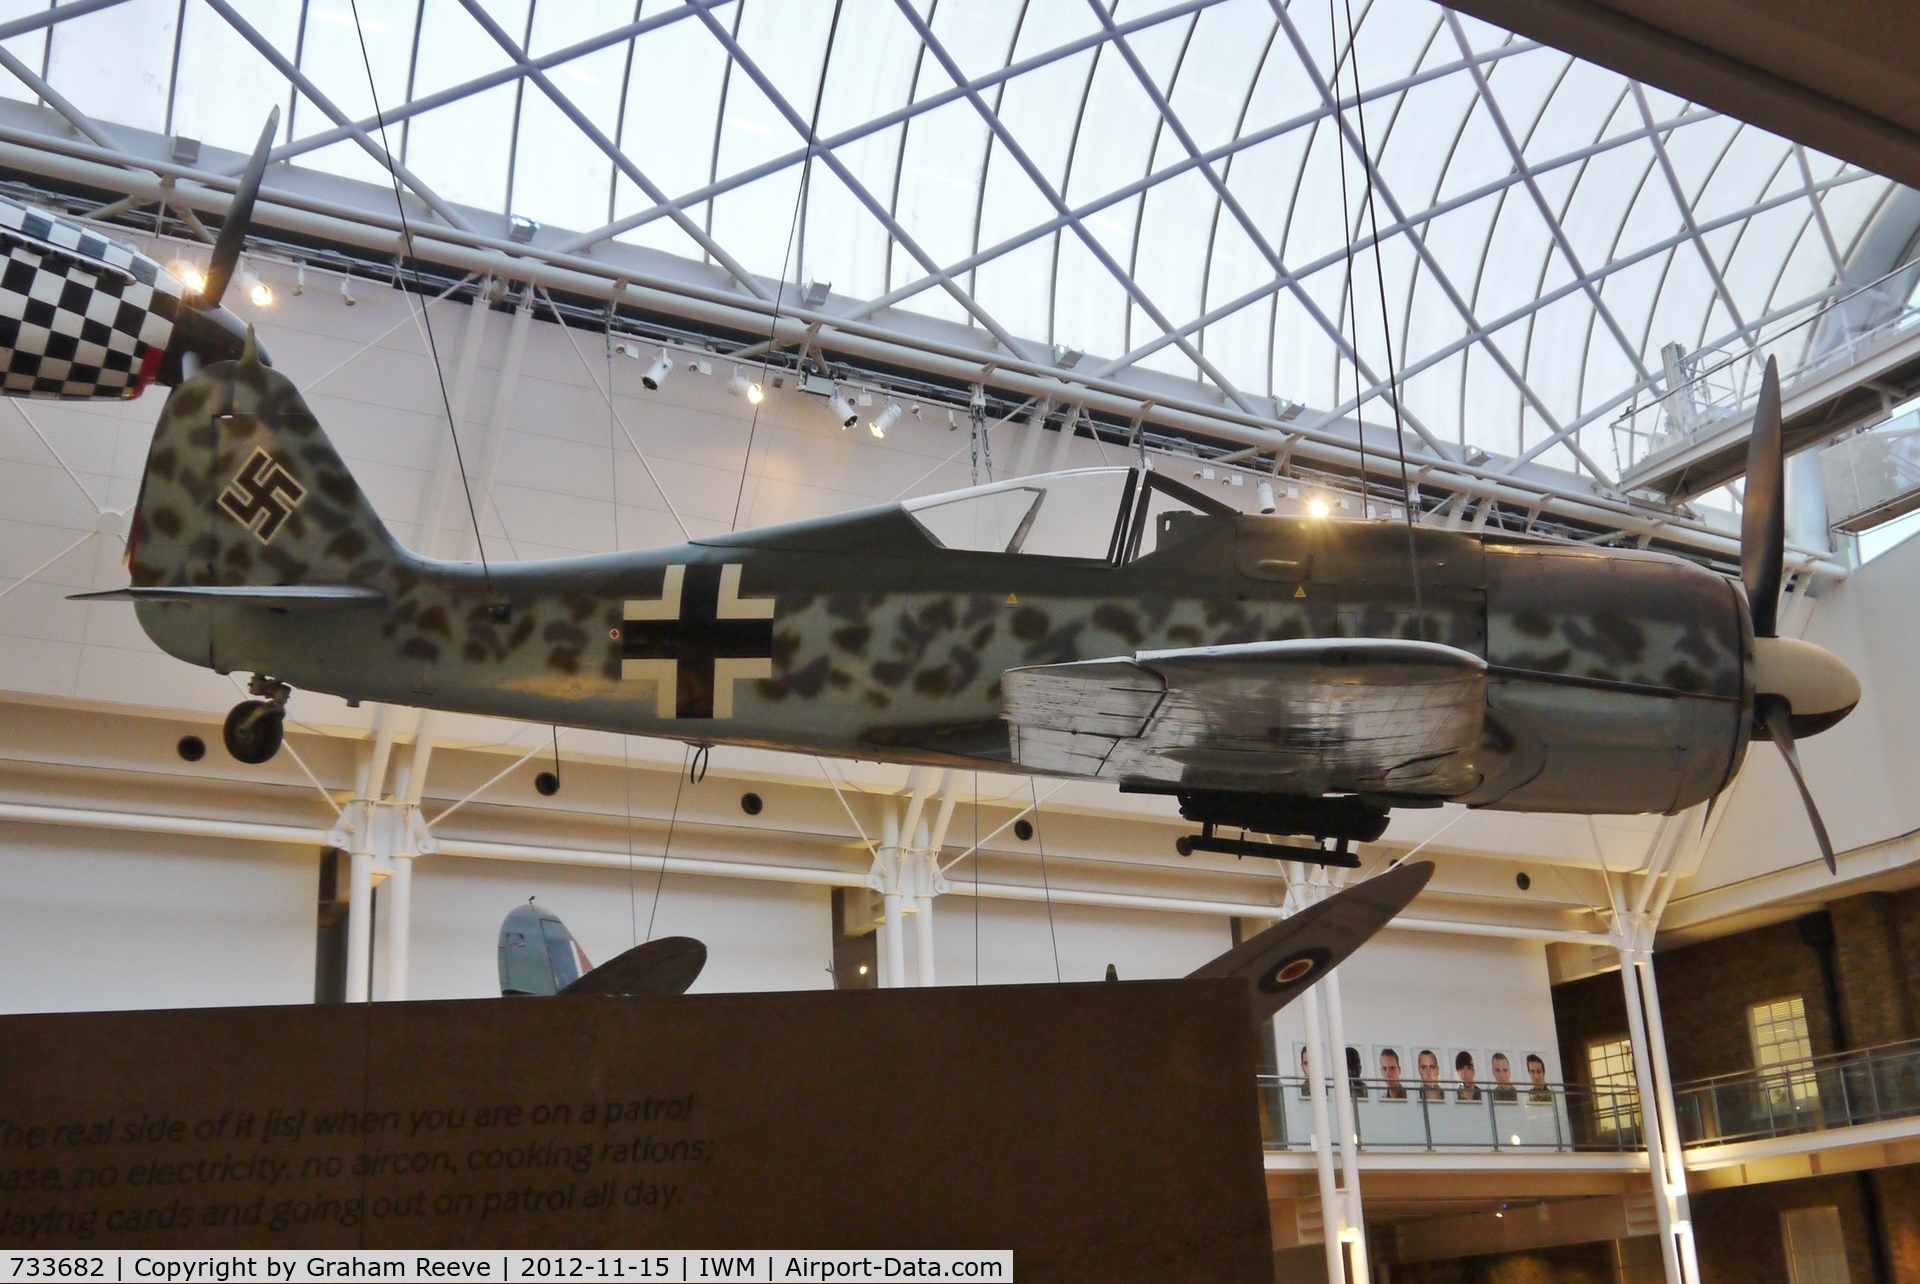 733682, 1944 Focke-Wulf Fw-190A-8 C/N 733682, On display at the Imperial War Museum London.